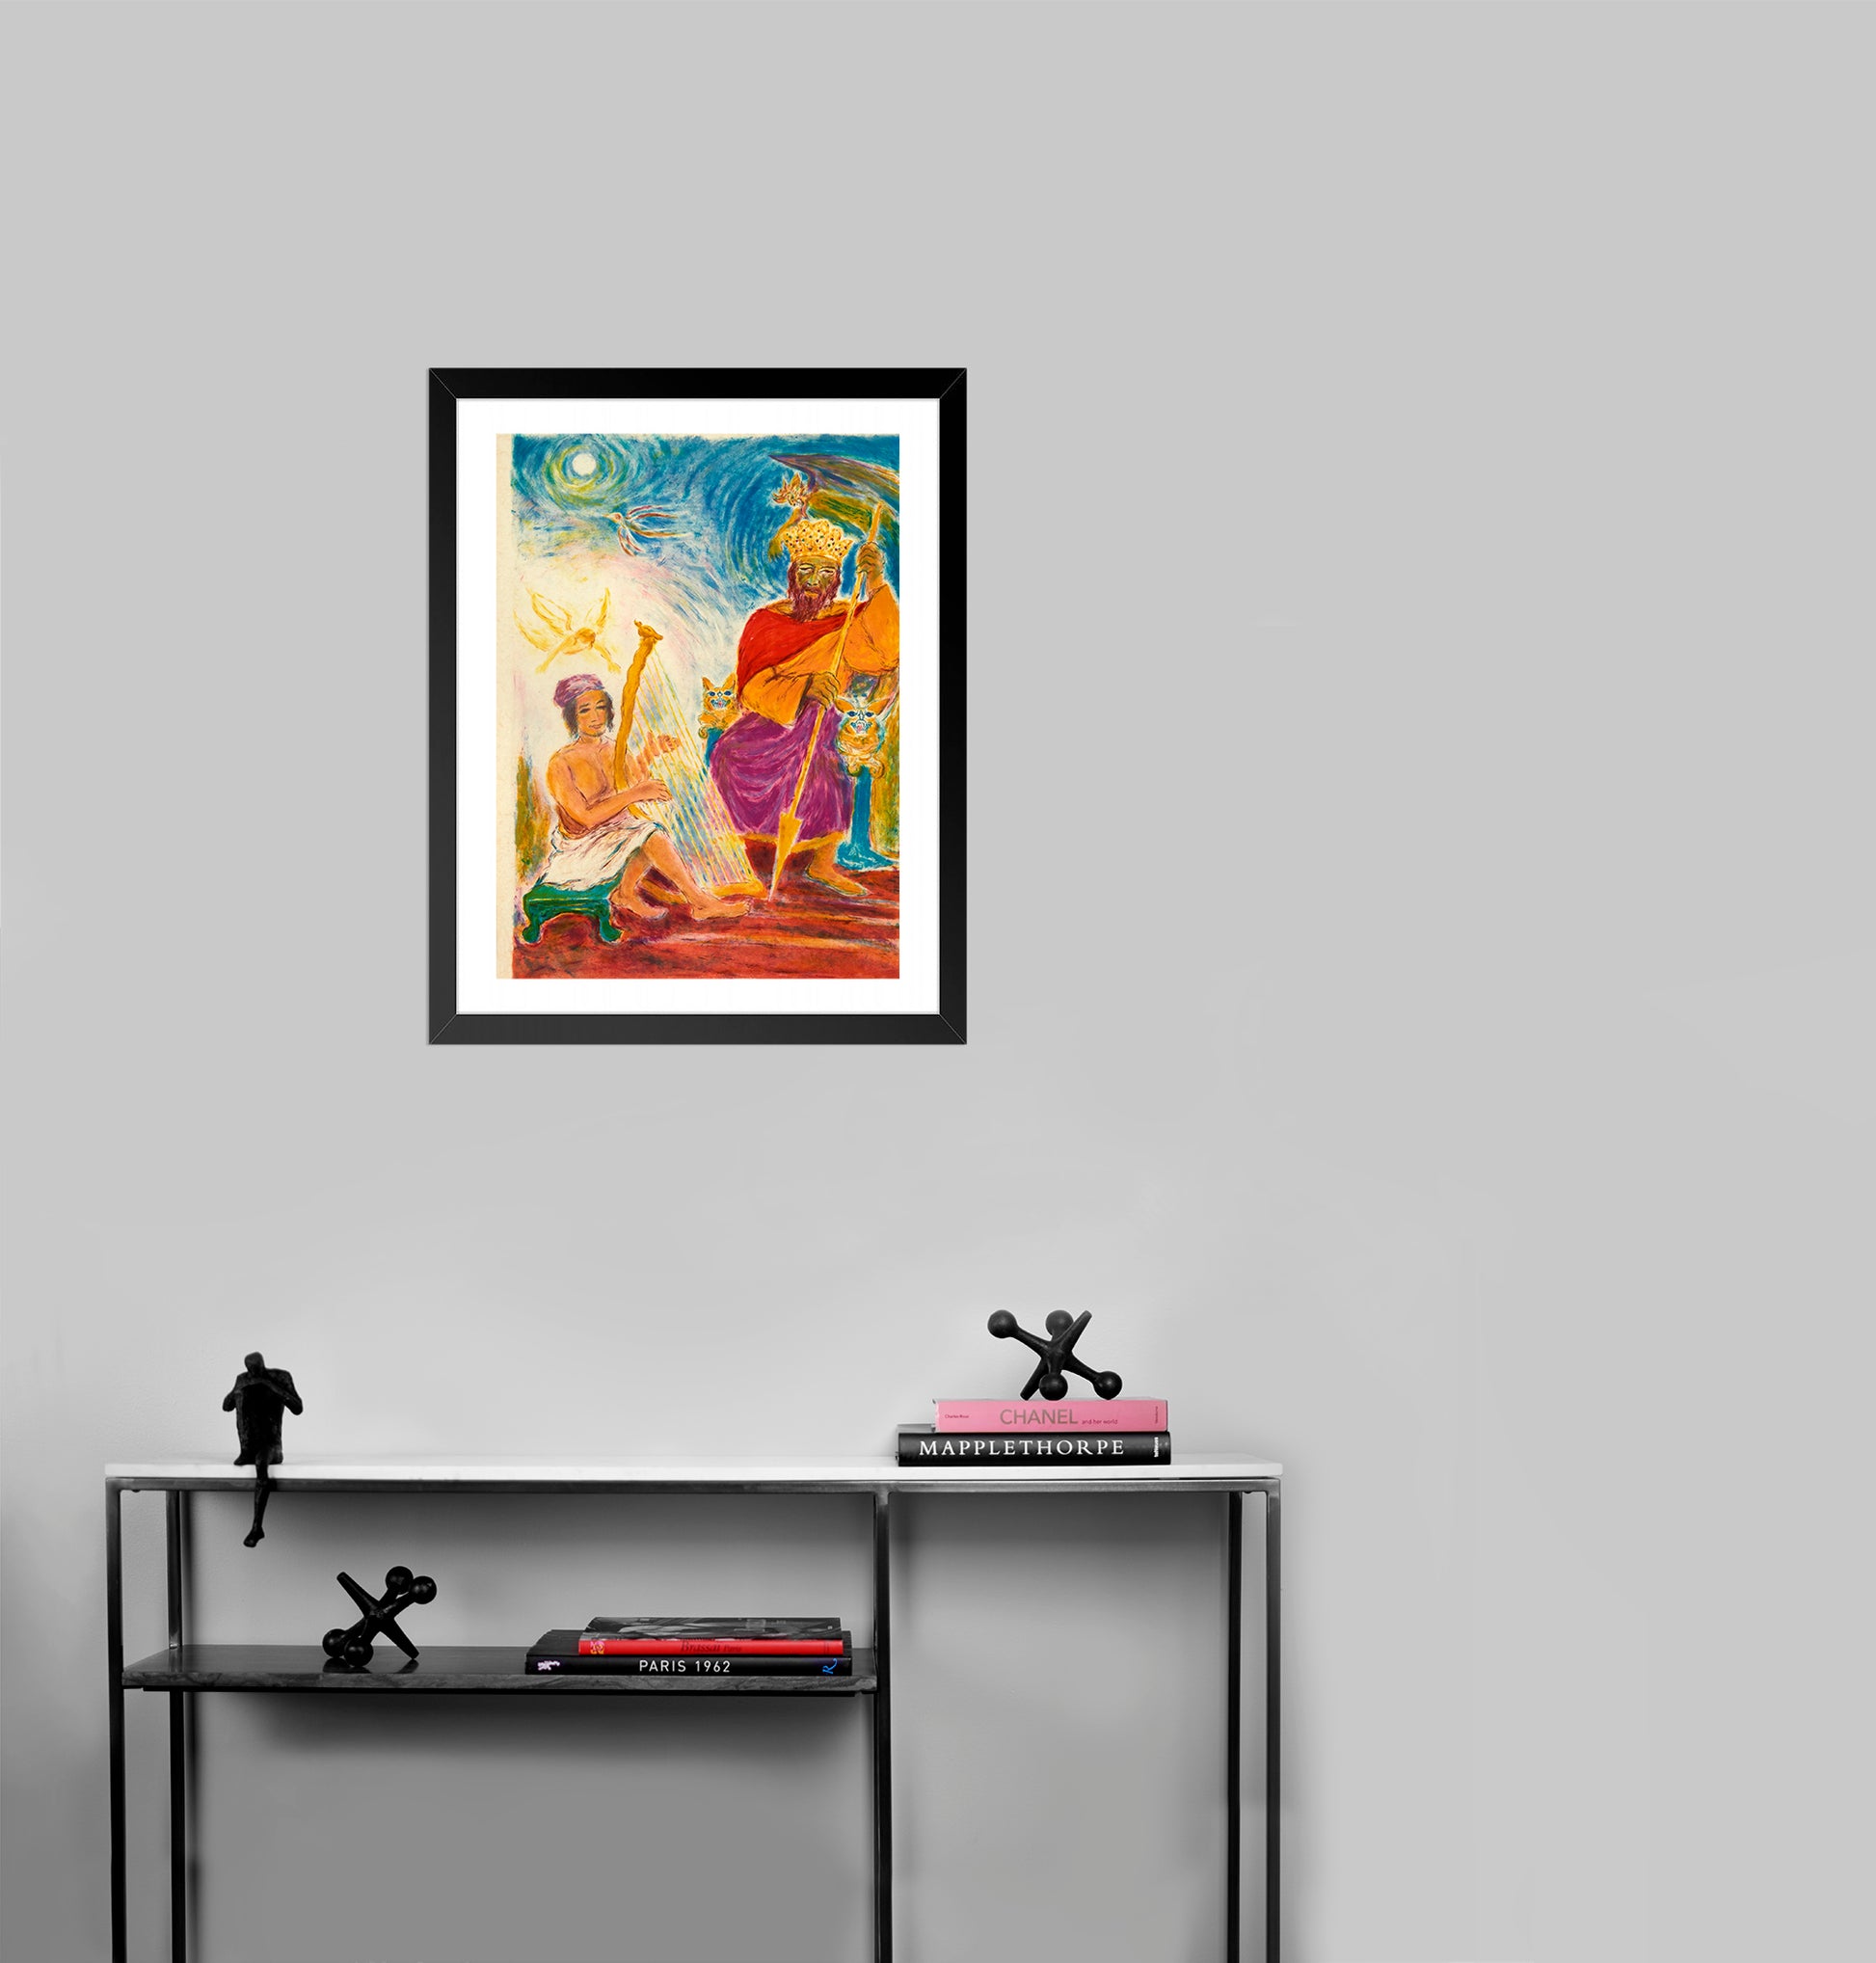 Neptune by Ira Moskowitz - Mourlot Editions - Fine_Art - Poster - Lithograph - Wall Art - Vintage - Prints - Original